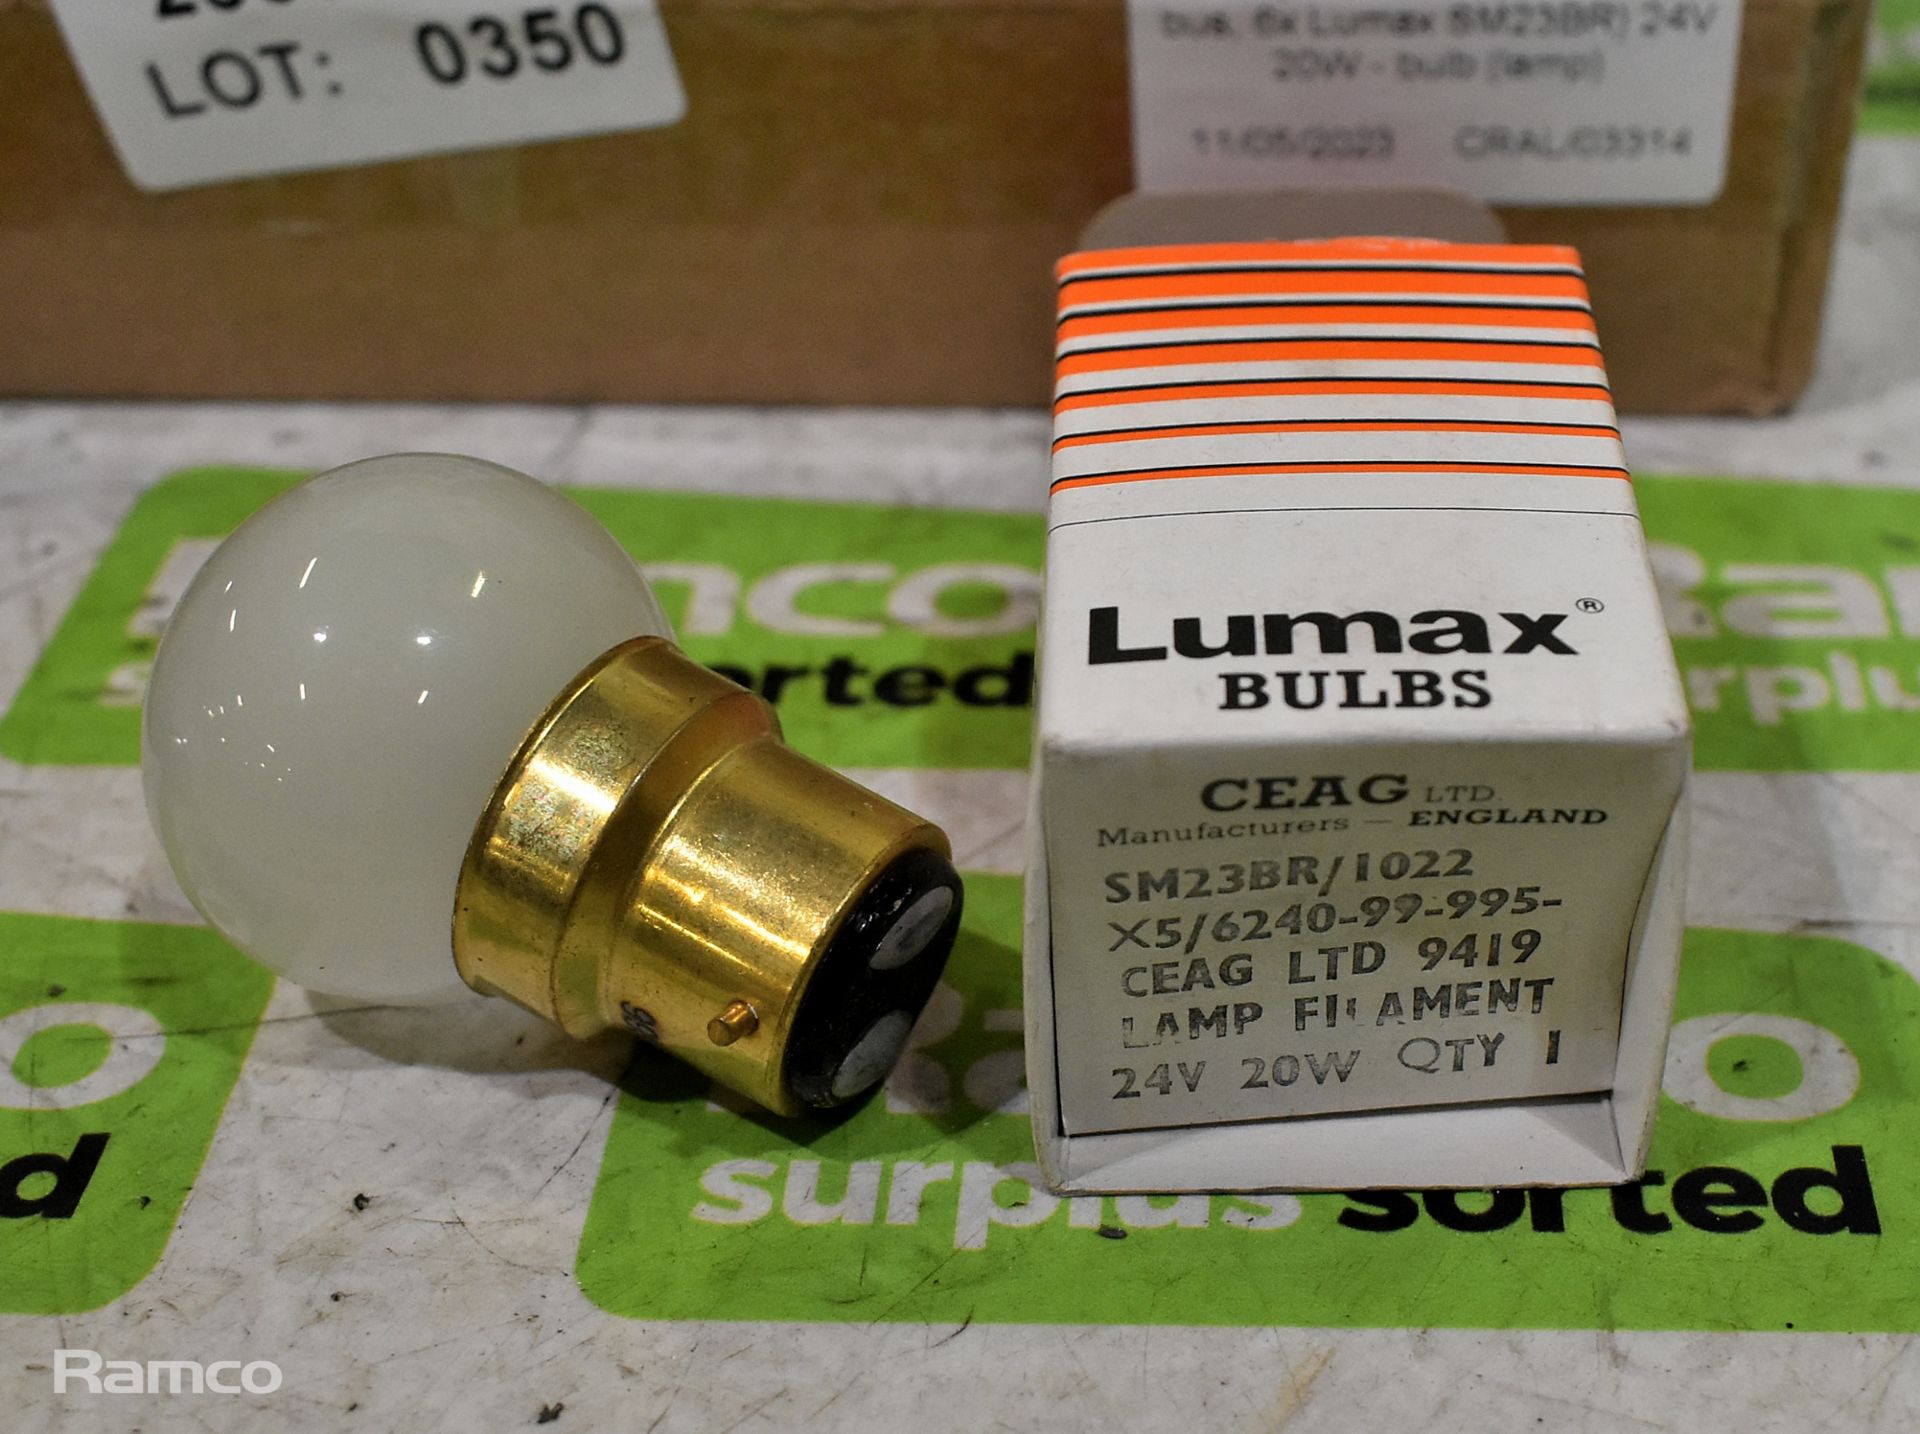 14x (8x Autolamps BA22D bus, 6x Lumax SM23BR) 24V 20W - bulbs - Image 3 of 3